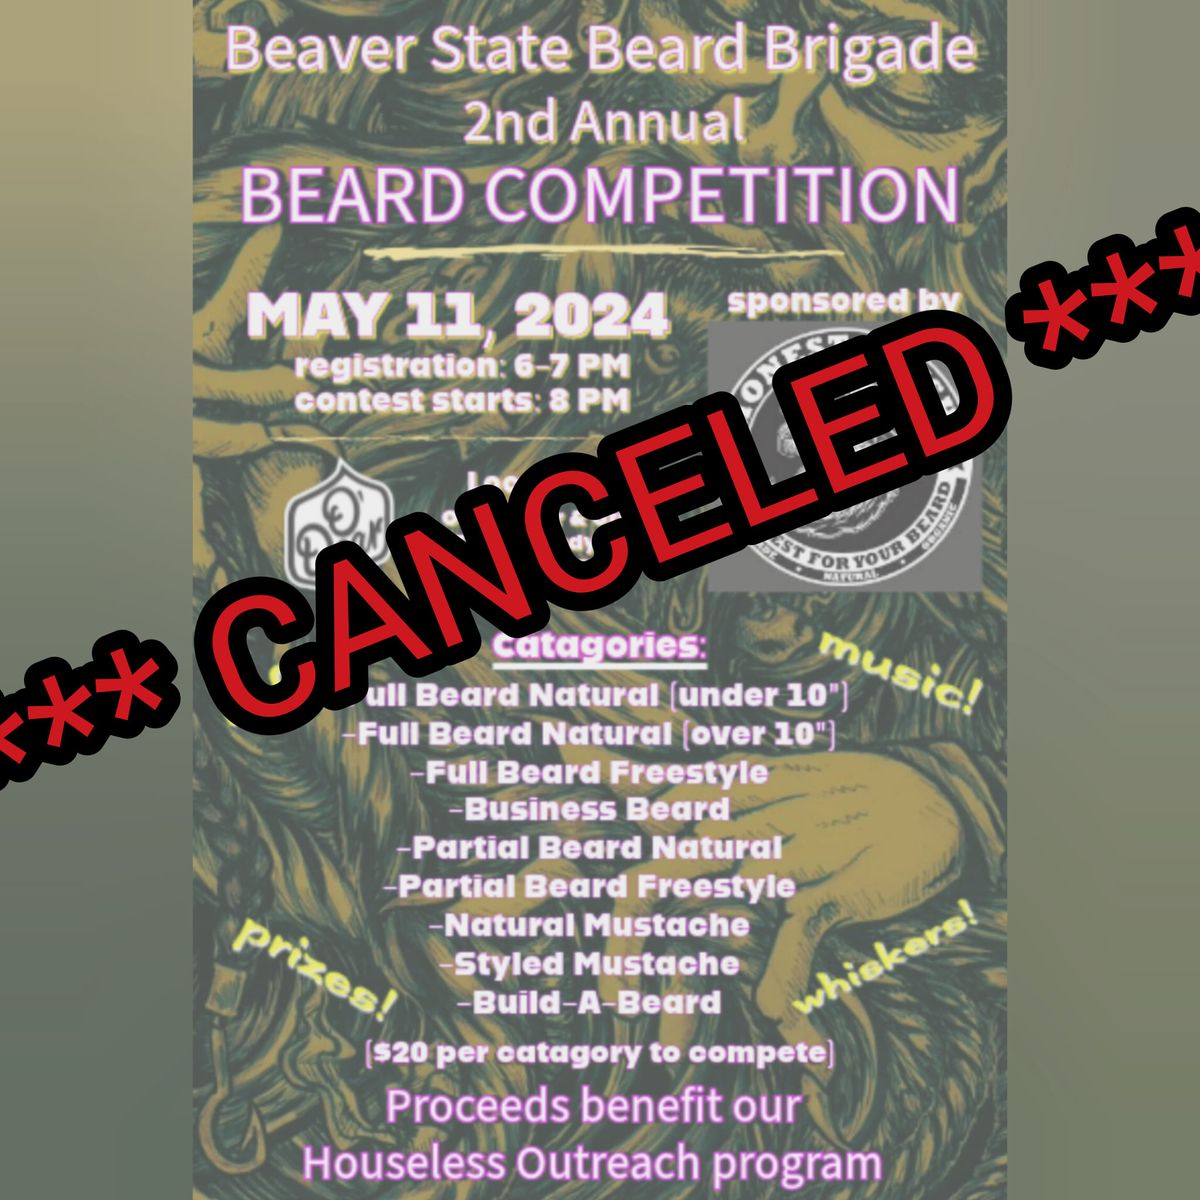 Beaver State Beard Brigade's 2nd annual Beard Competition